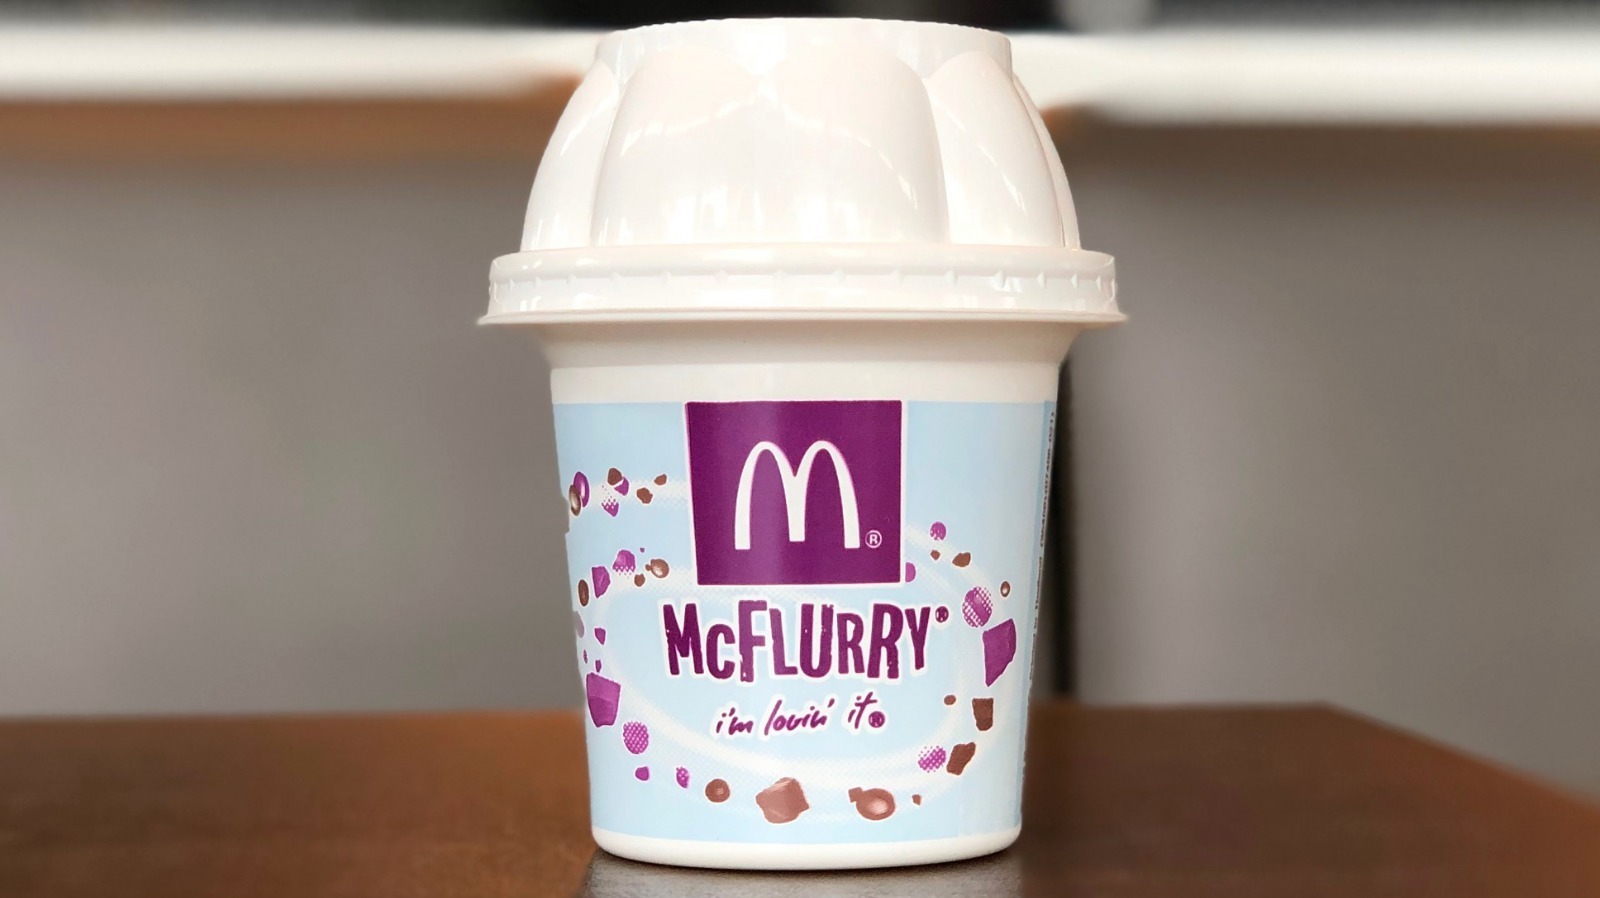 The New McDonald's McFlurry Flavor Is The Ultimate Dessert MashUp